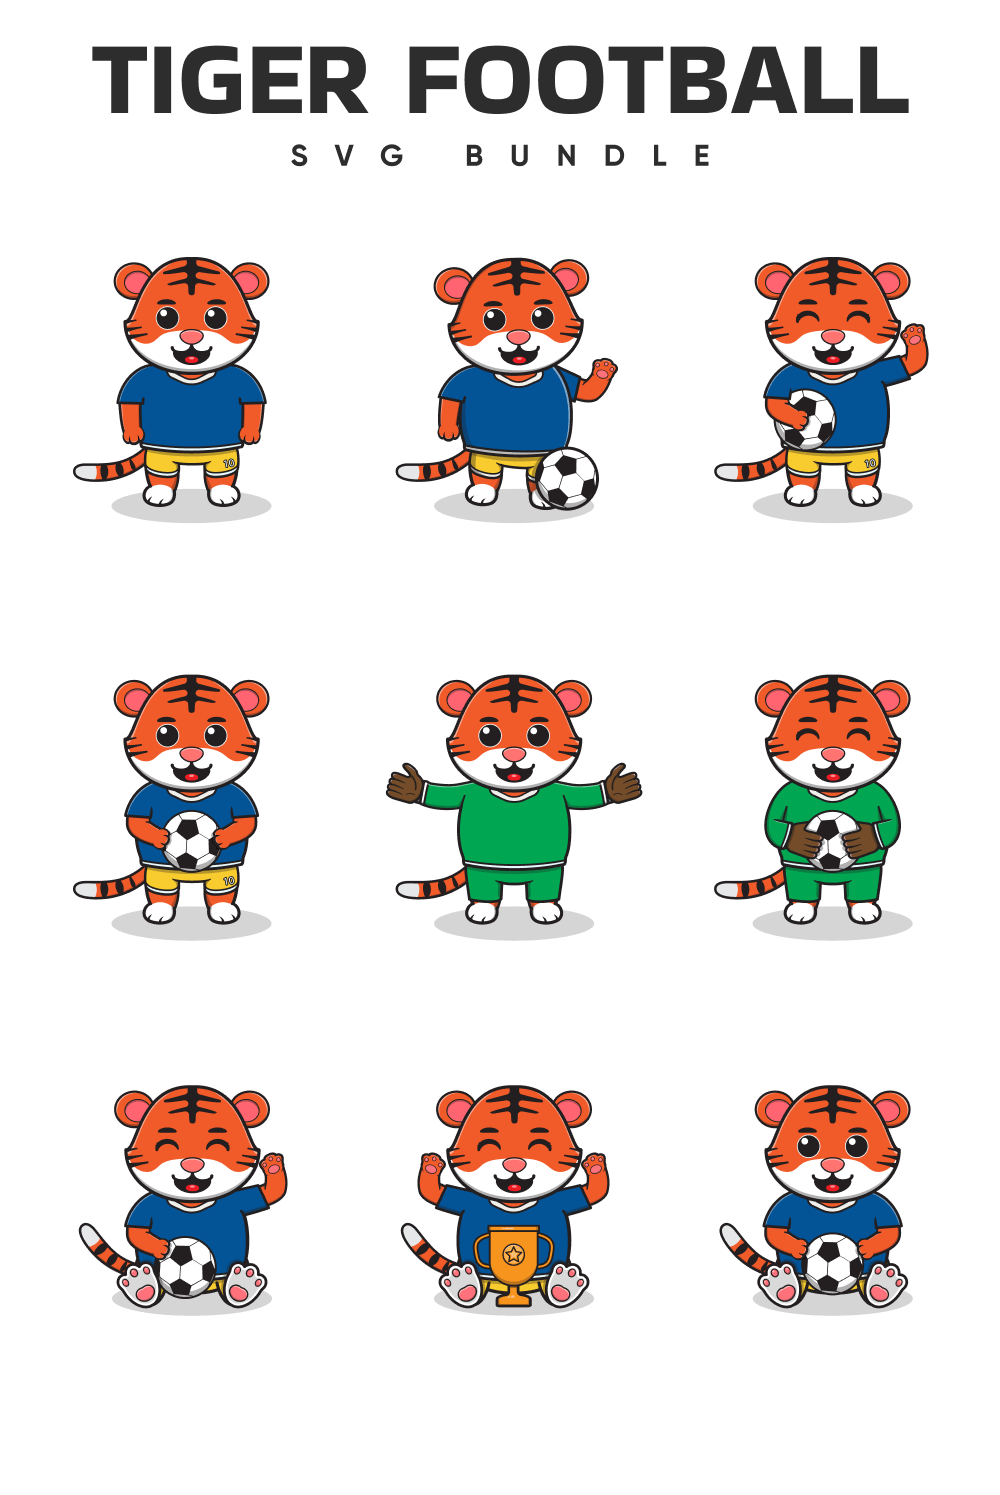 Cartoon tiger is playing with a soccer ball.